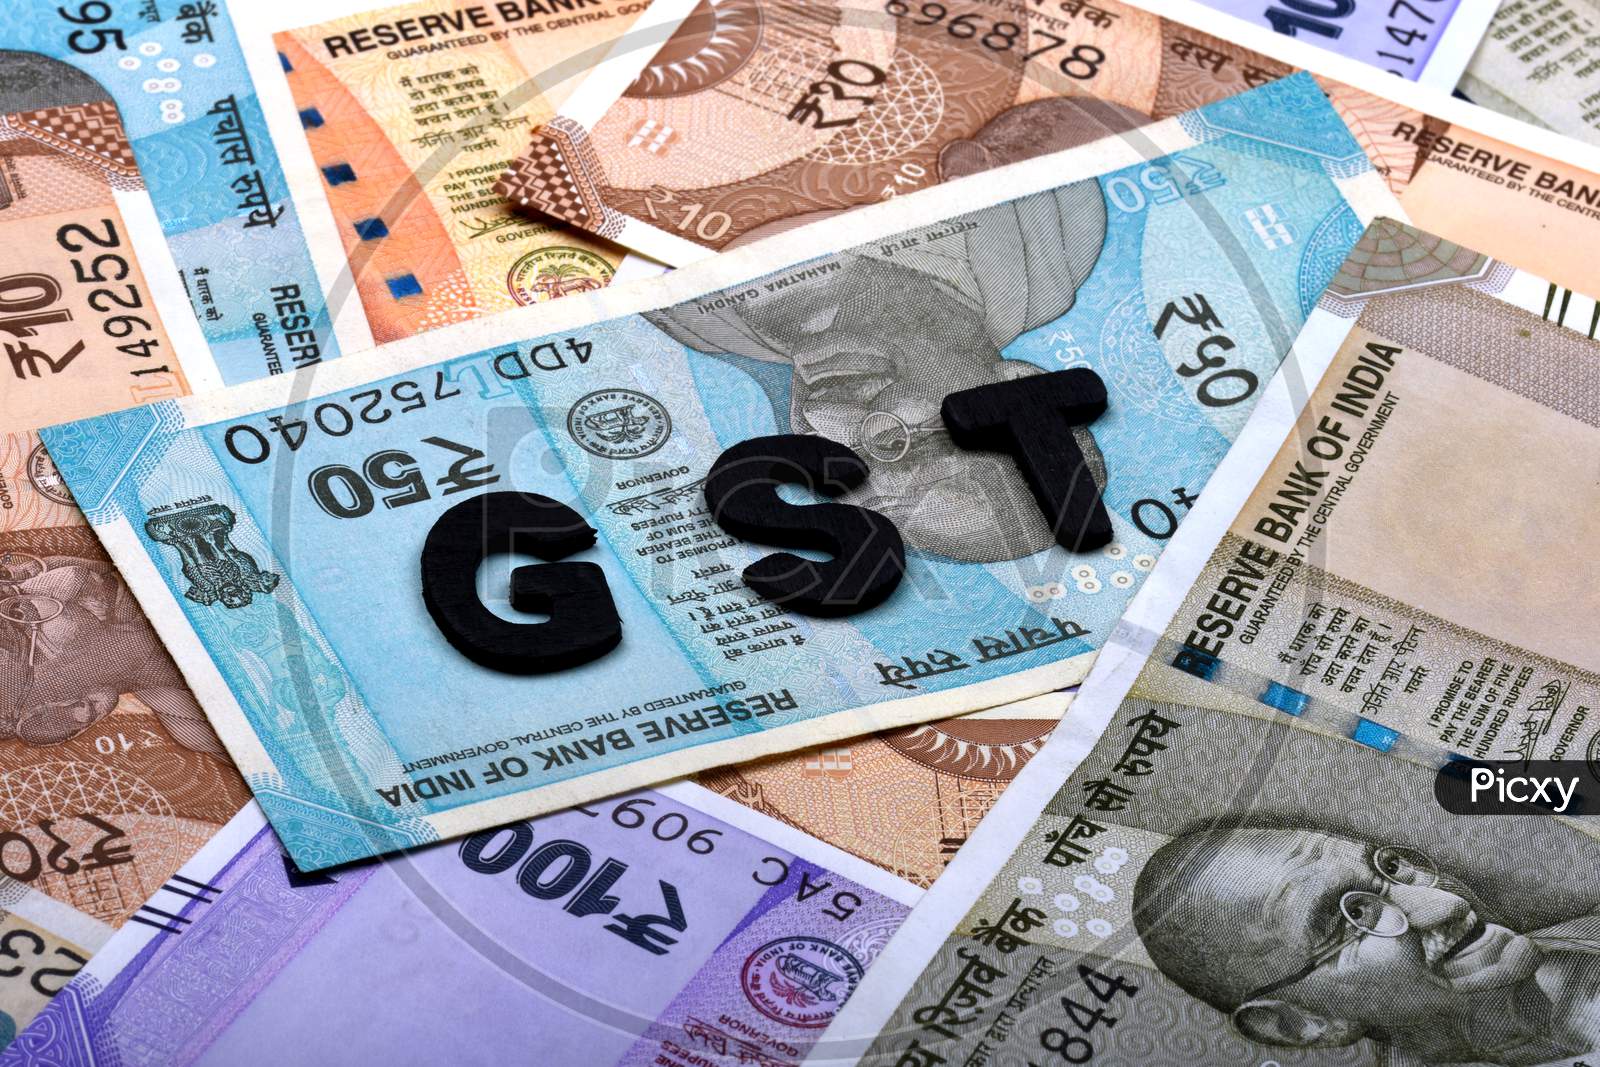 Gst Concept,Gst Alphabet On Money Background,Business And Financial Concept Idea,Indian Currency, Rupee, Indian Rupee,Indian Money, Business, Finance, Investment, Saving And Corruption - Image